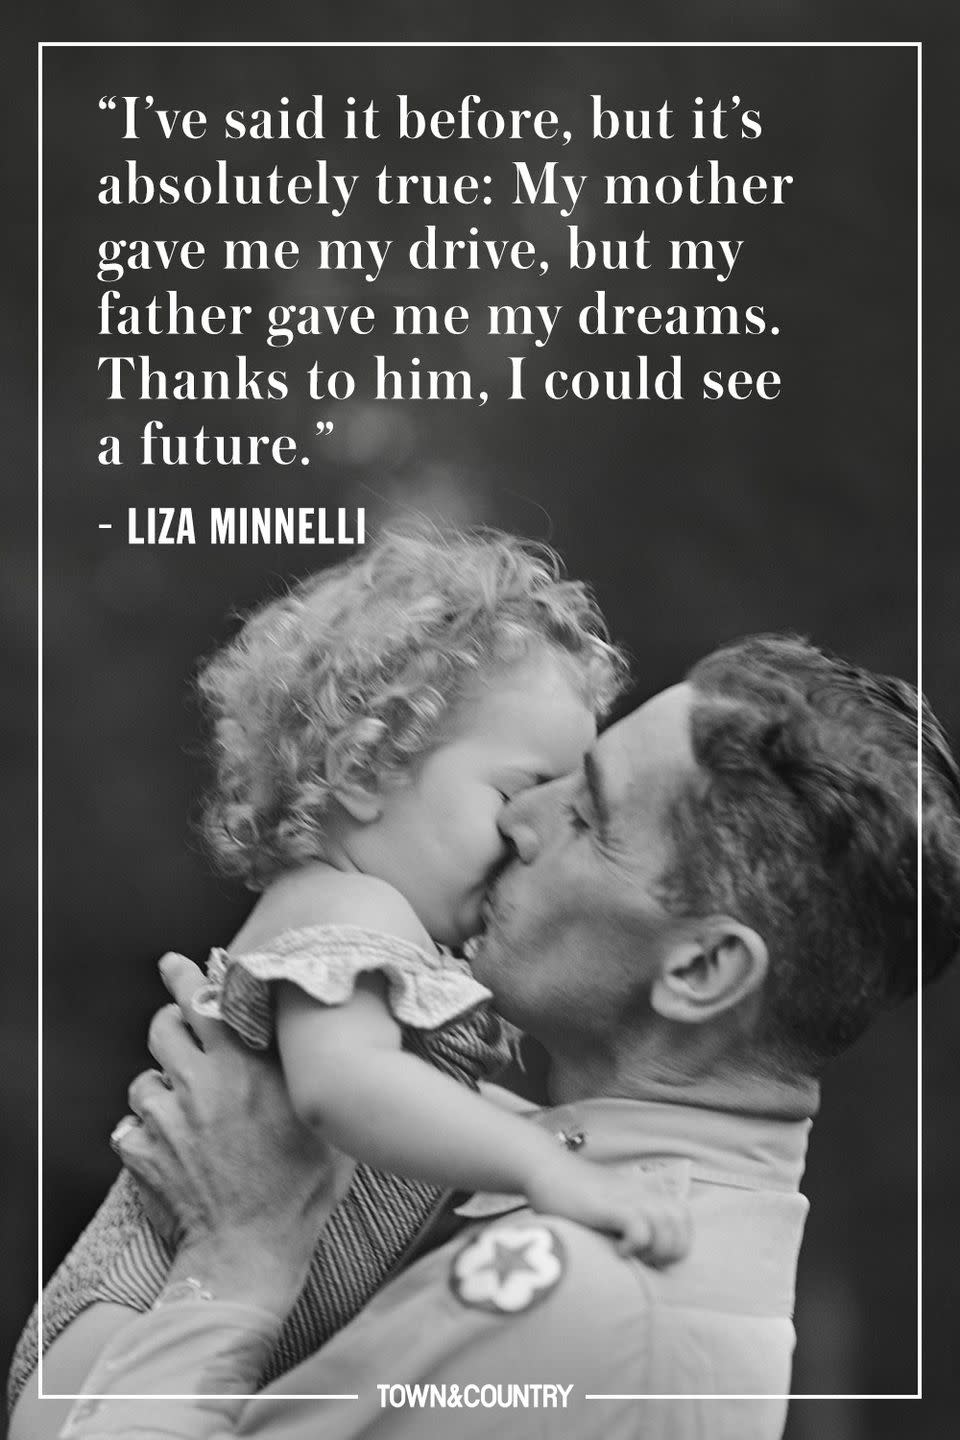 <p>"I've said it before, but it's absolutely true: My mother gave me my drive, but my father gave me my dreams. Thanks to him, I could see a future."</p><p> - Liza Minnelli</p>